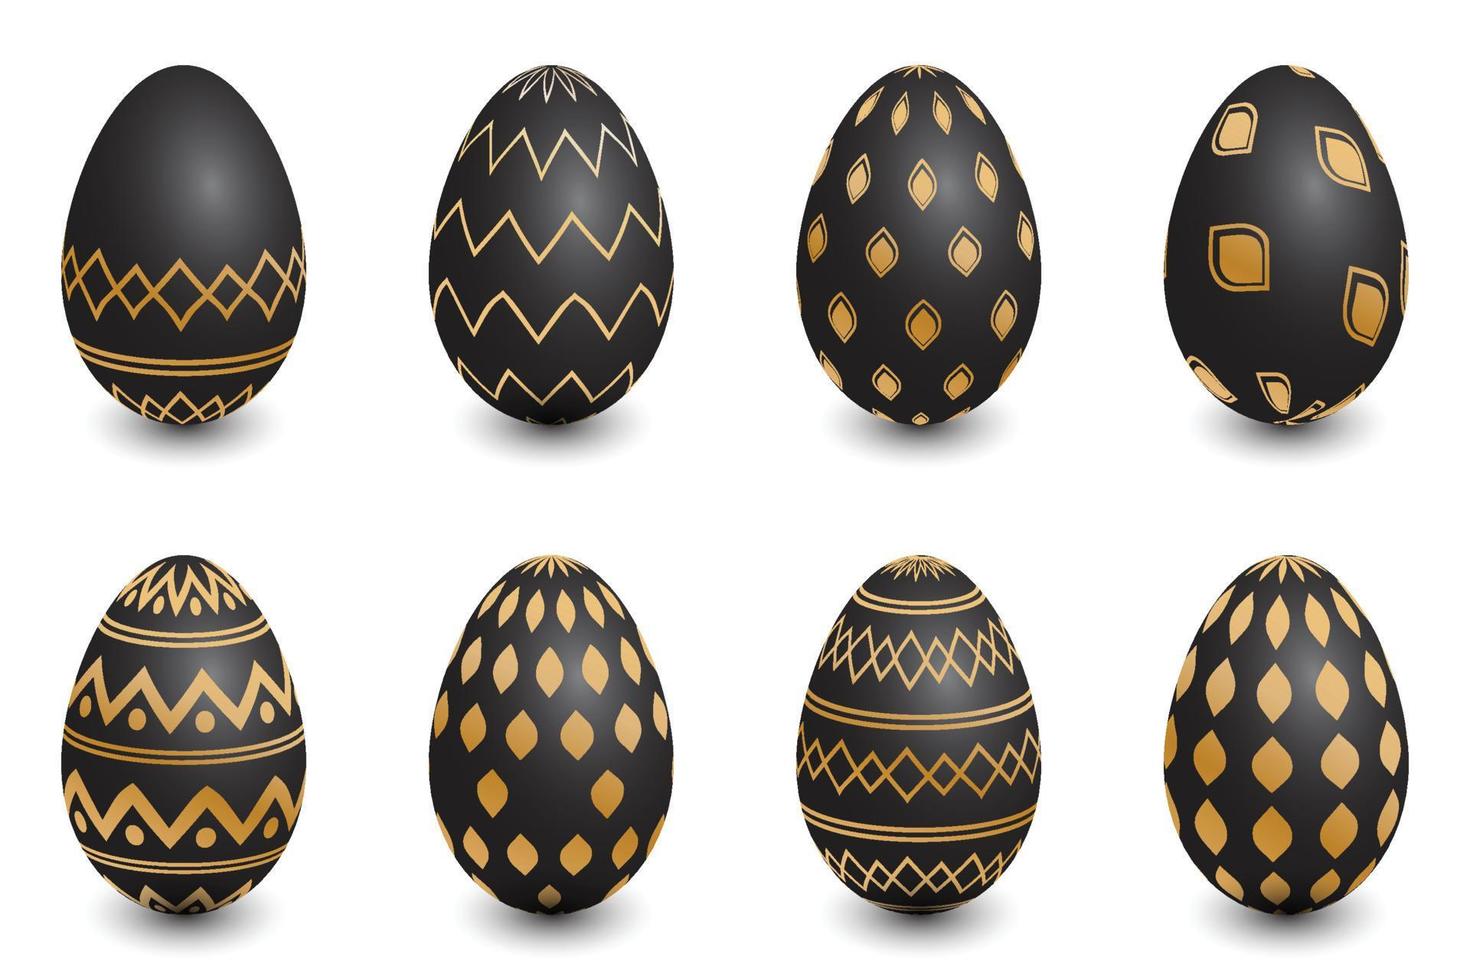 Black easter egg with gold pattern decoration vector